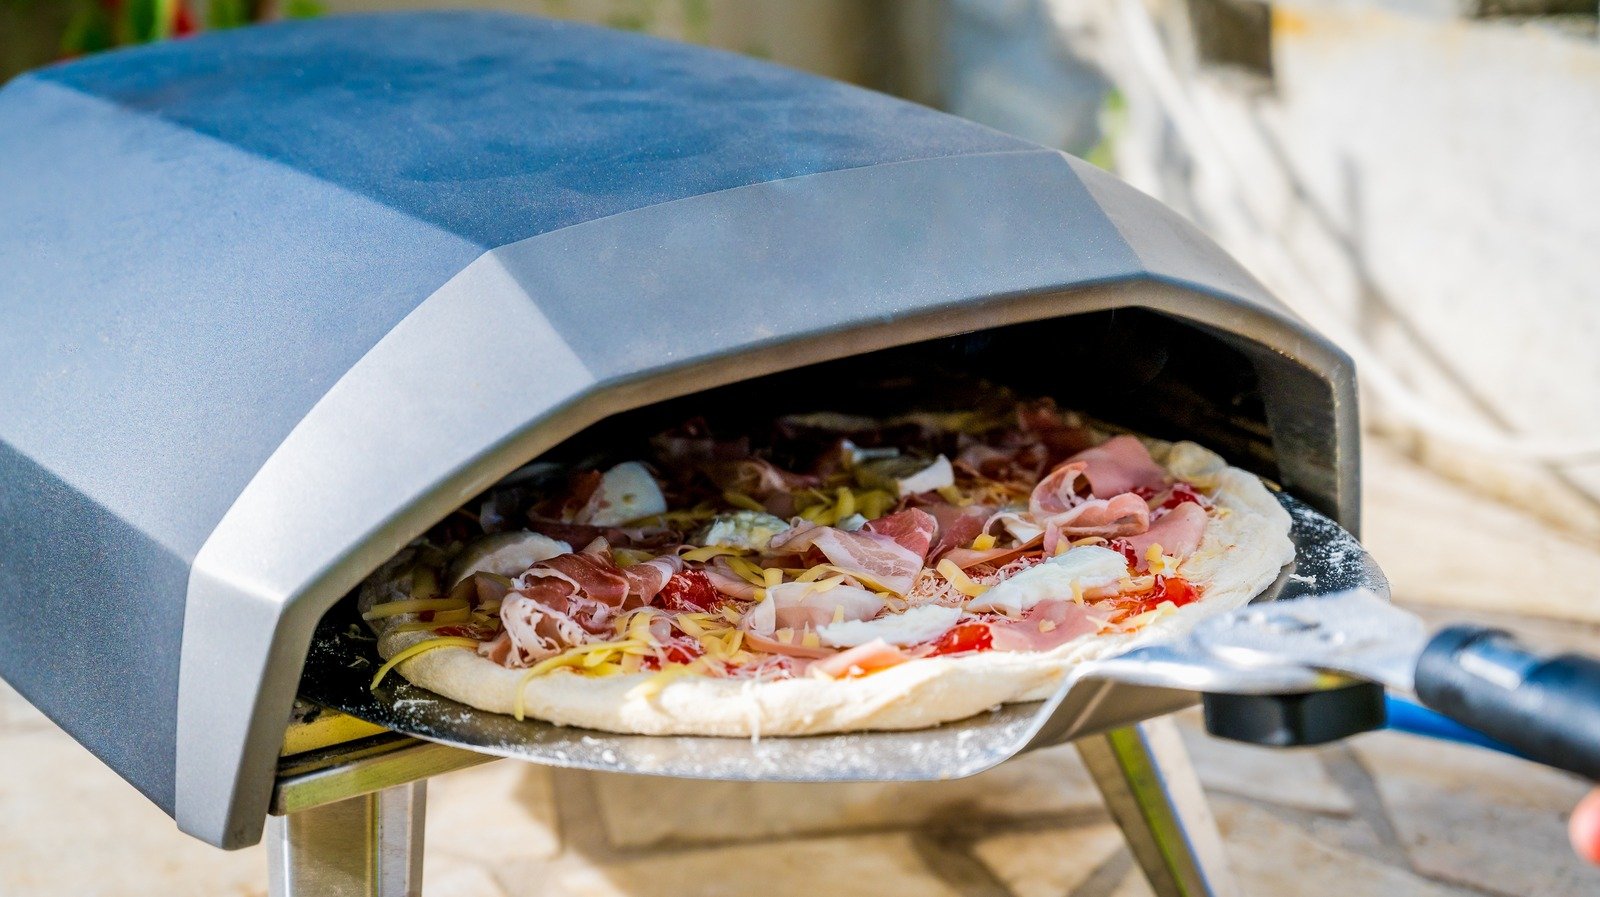 The Best Way To Clean A Pizza Oven